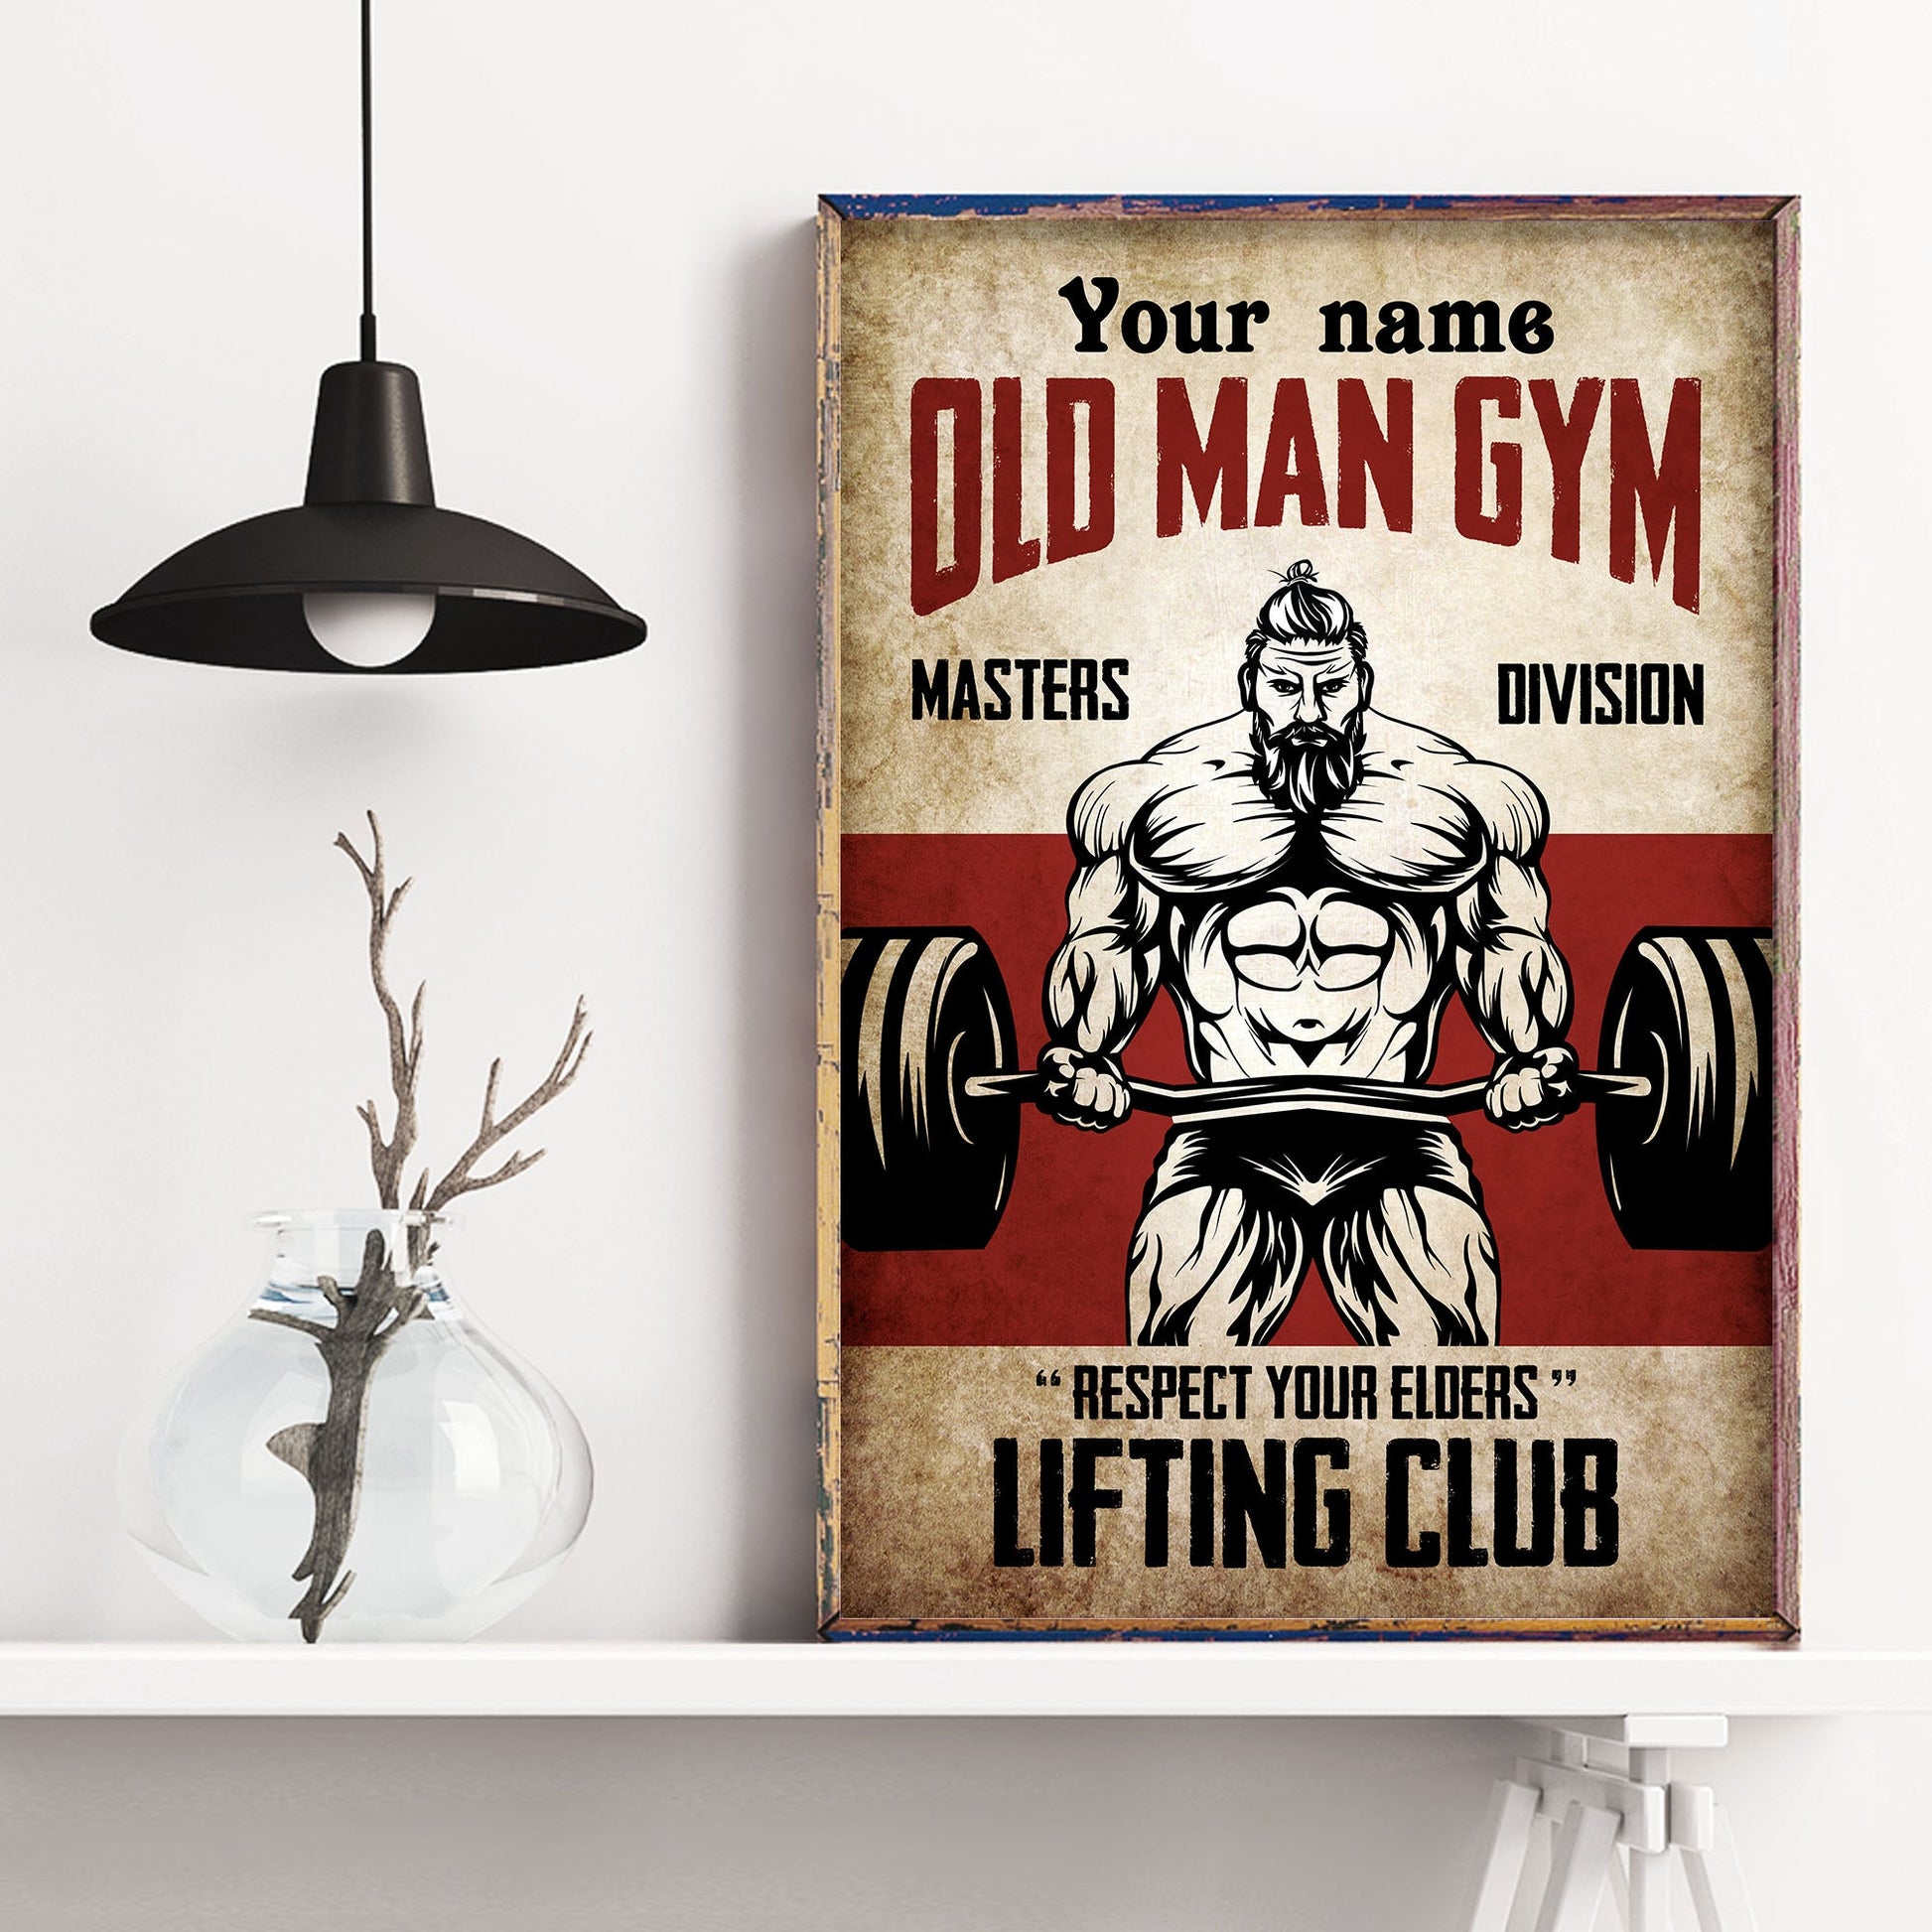 Training Partners for Life - Personalized Gifts Custom Gym Canvas